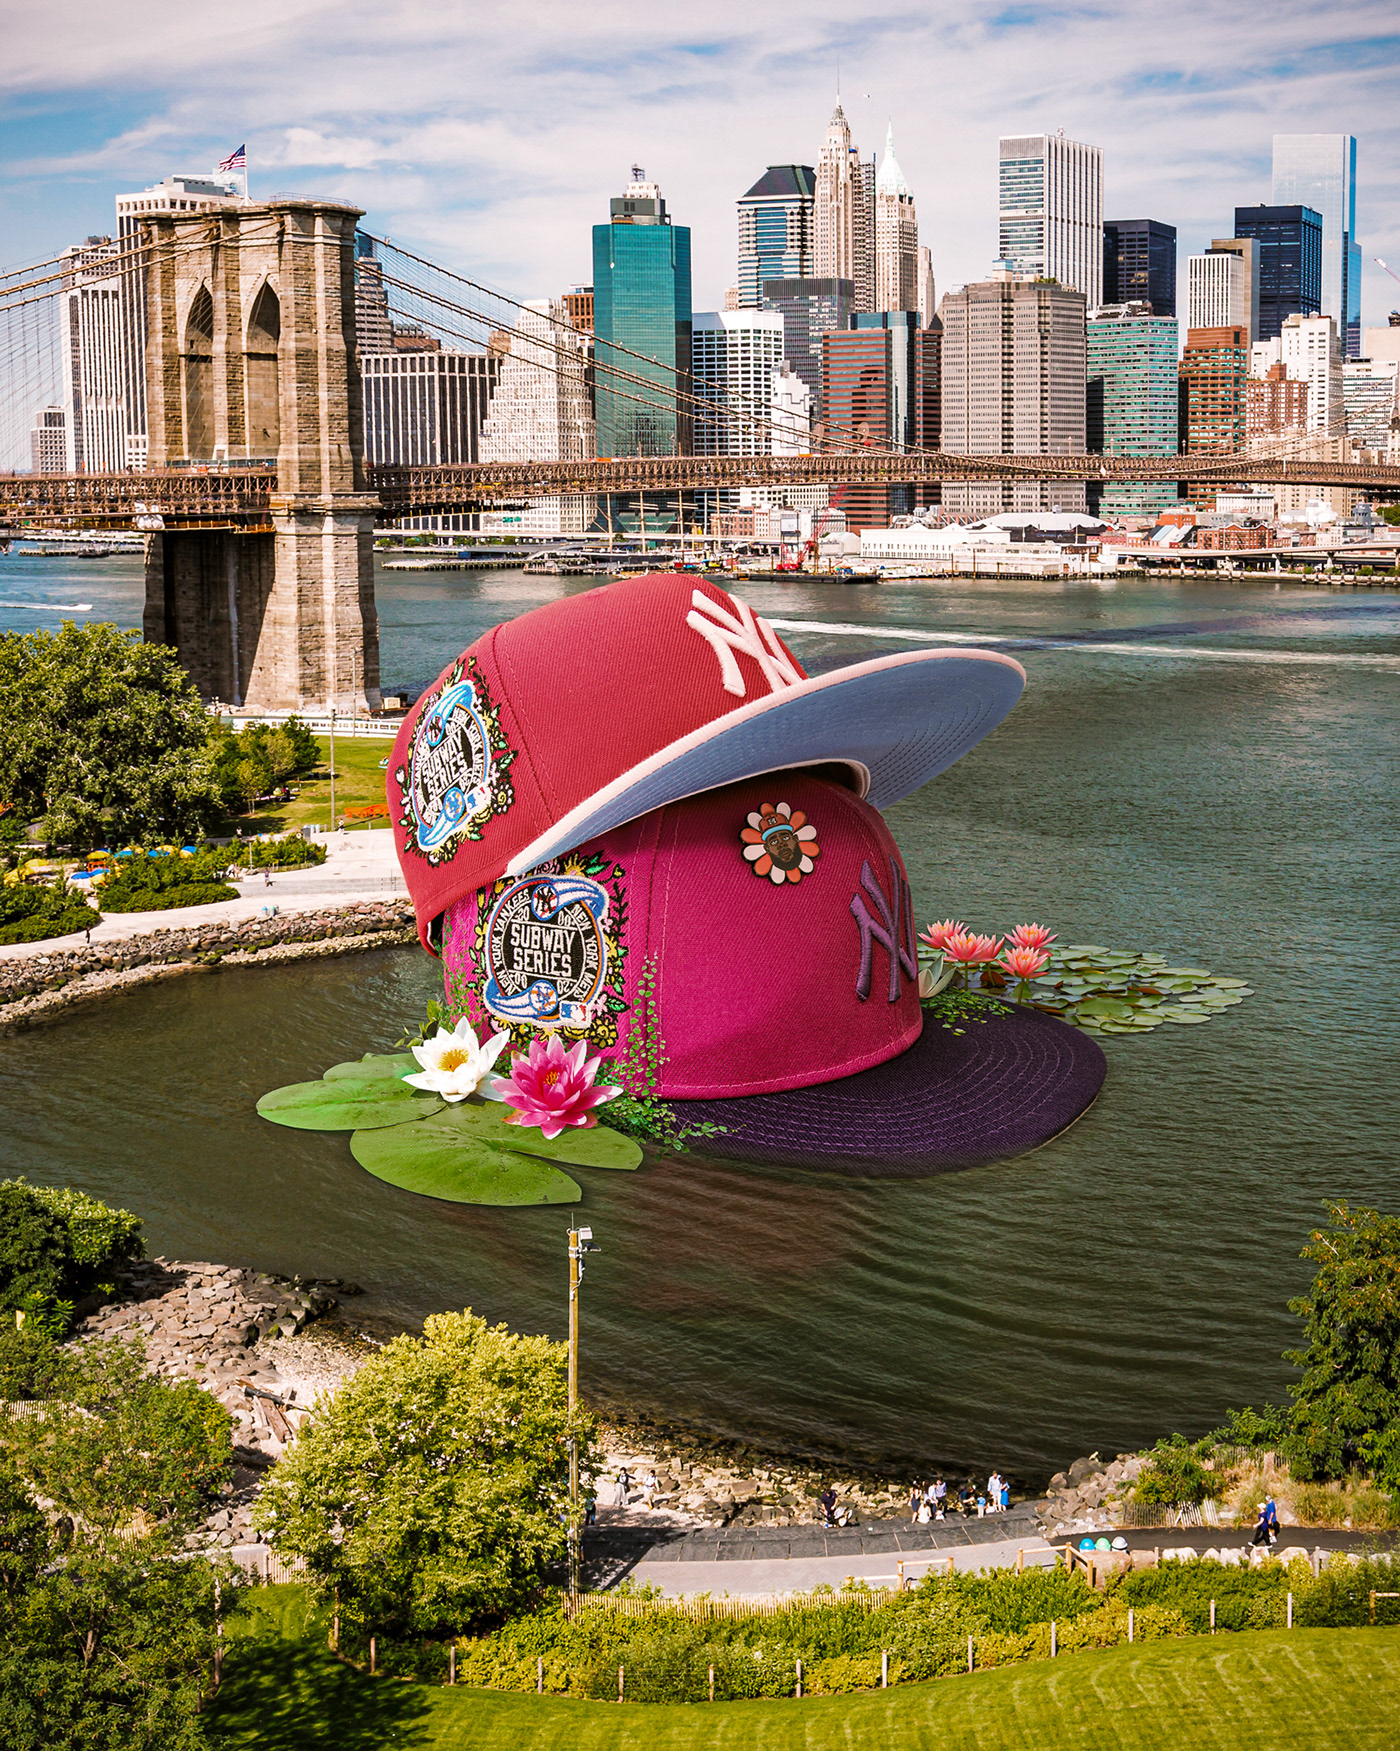 Photo composite of giant baseball hat in New York. Retouching using Photoshop